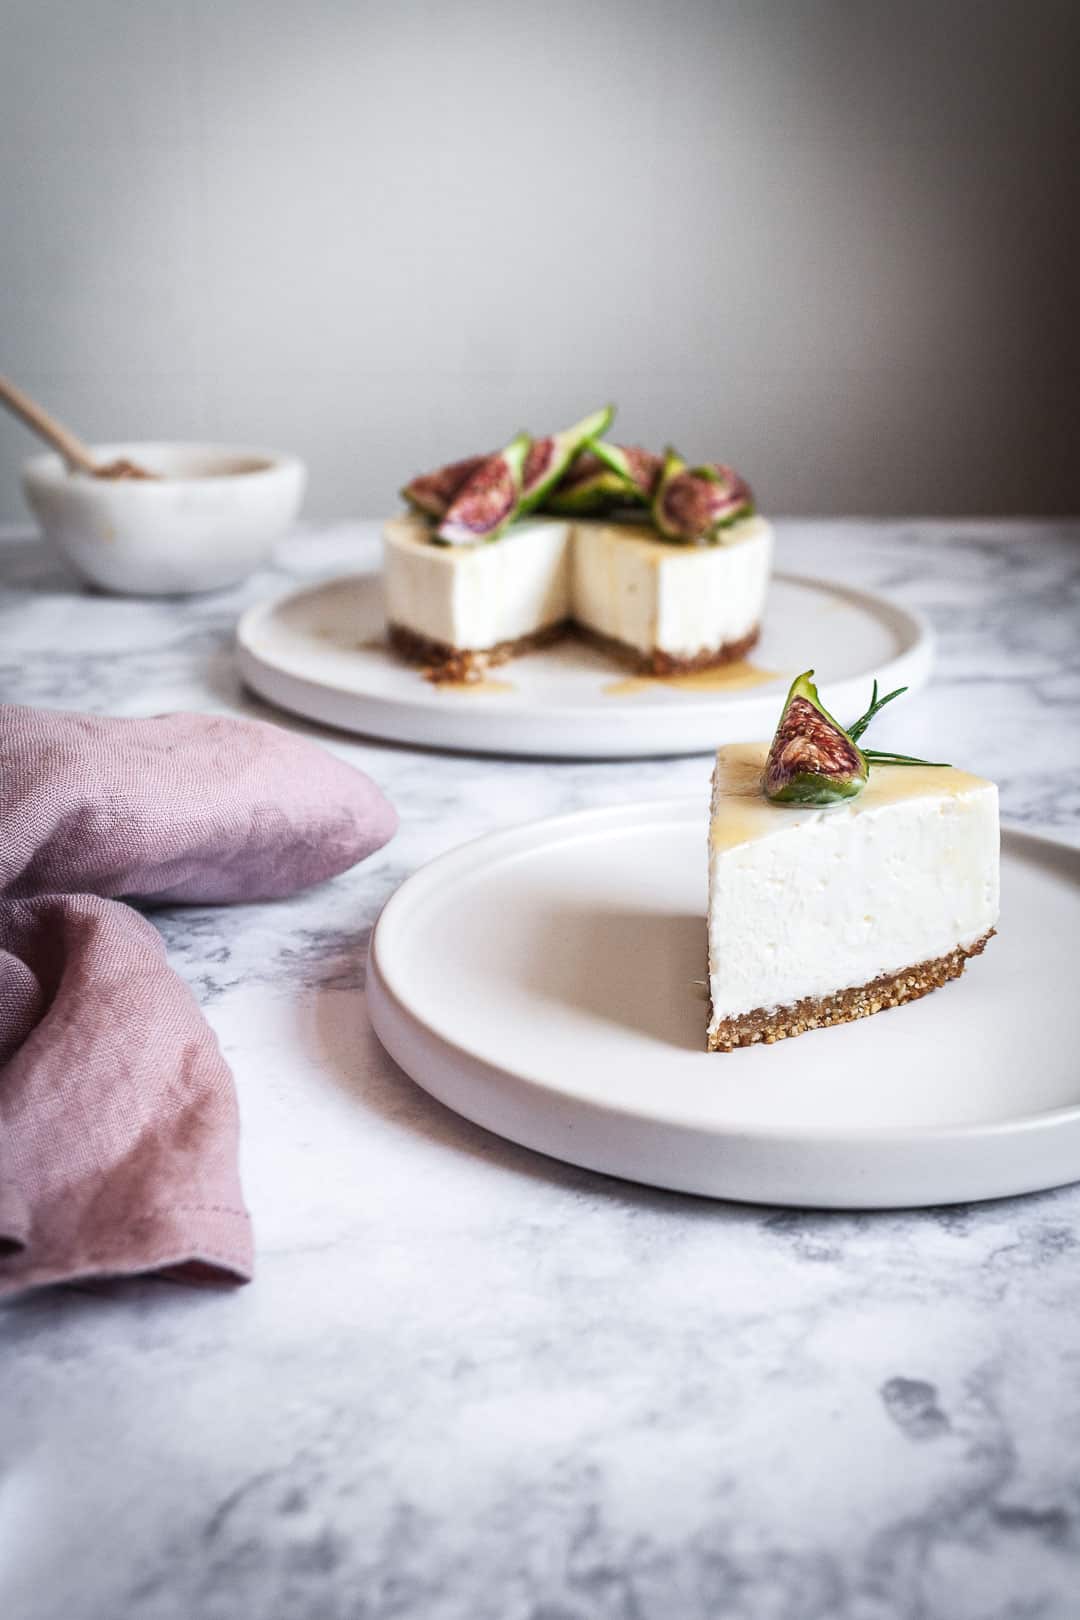 Honey orange cheesecake with figs and rosemary almond crust on a marble backdrop - birds eye view with white plates, pink linen napkin and a bowl of honey